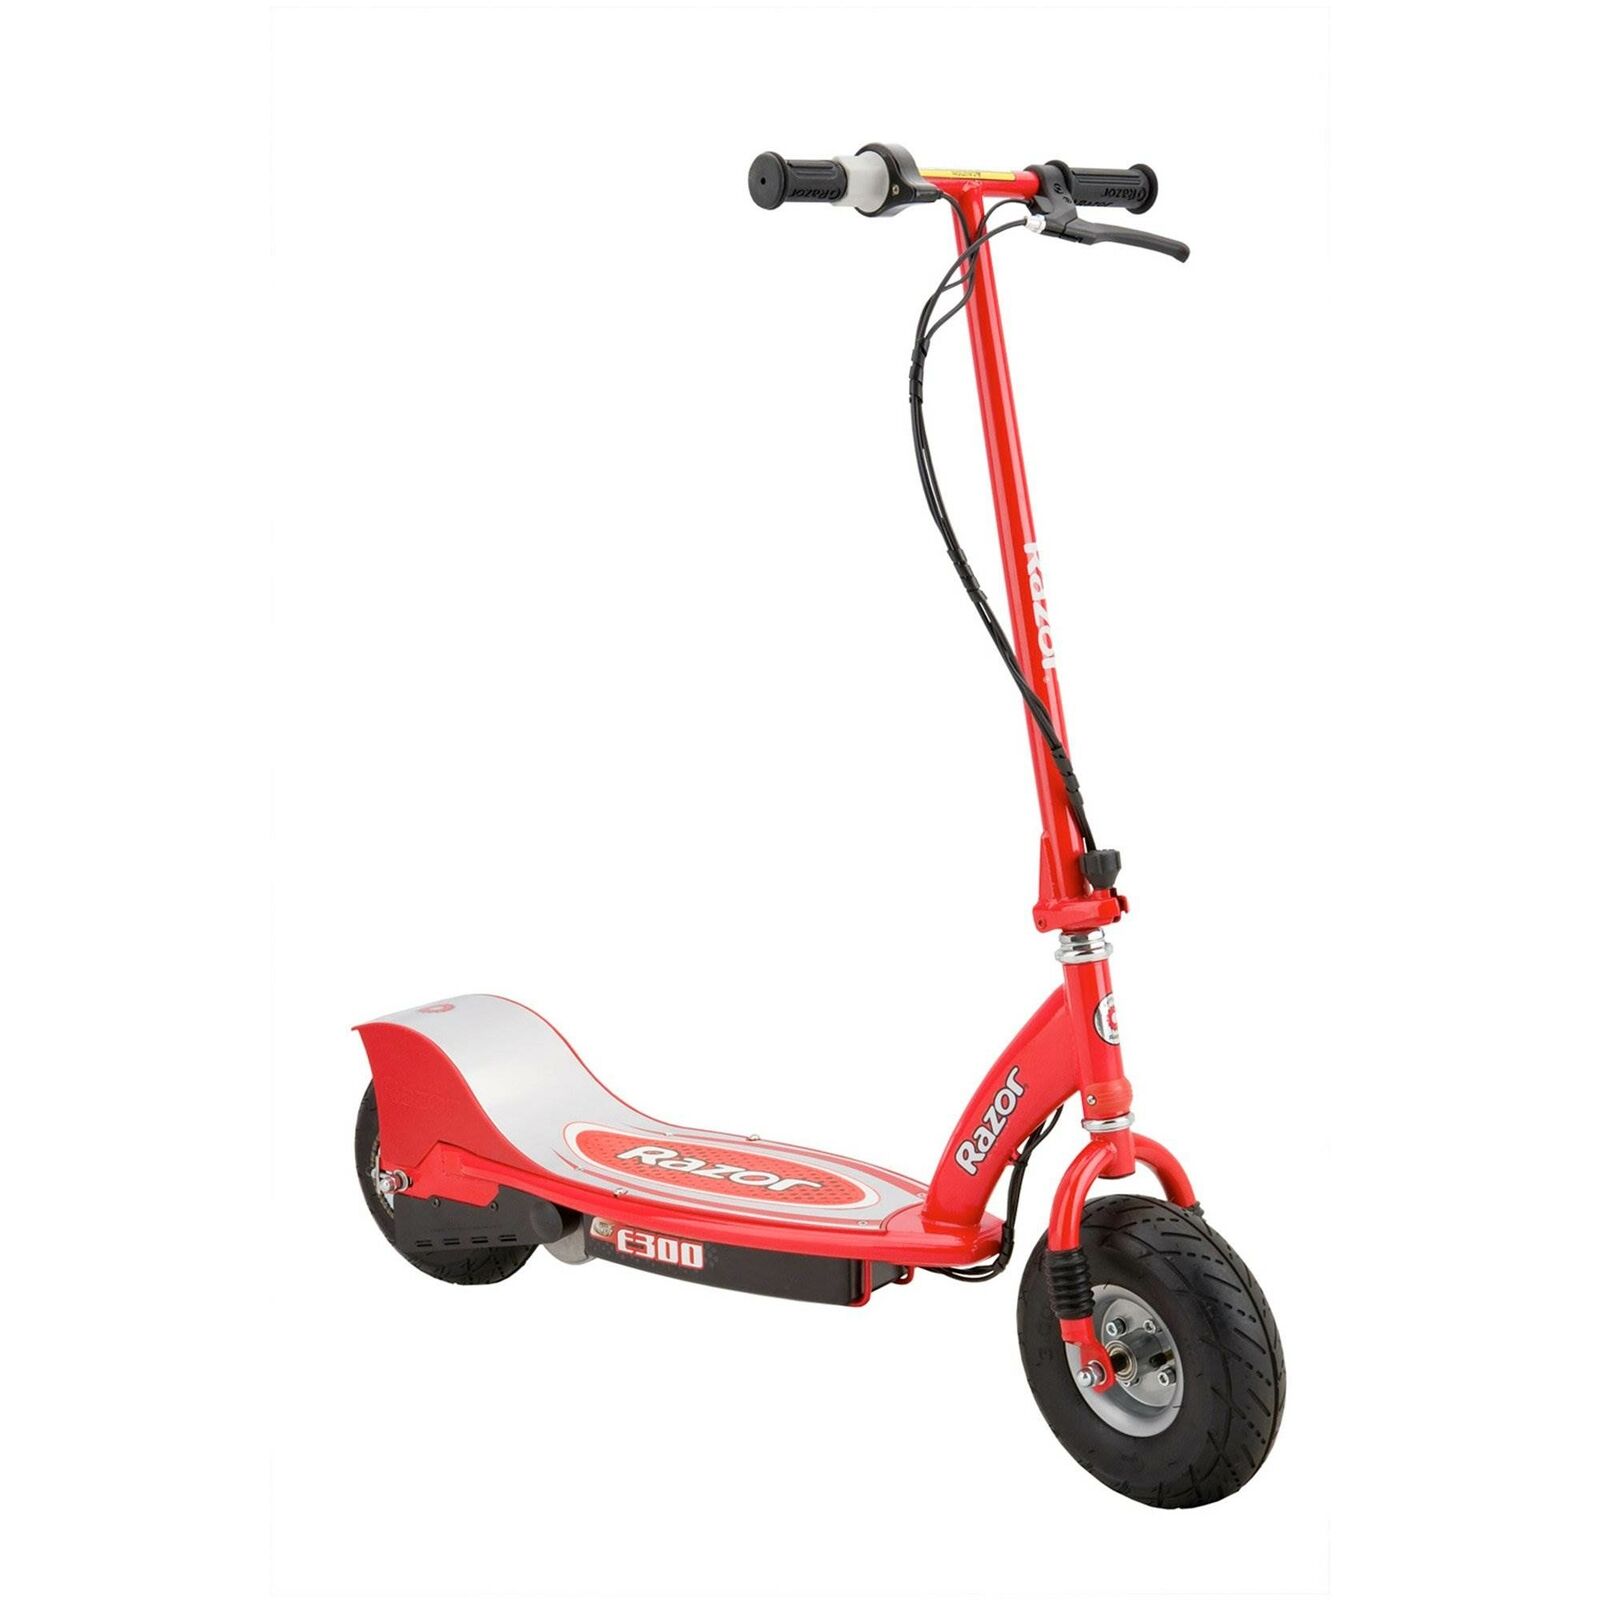 Razor E300 Adult Ride-On 24V High-Torque Motorized Electric Powered Scooter, Red